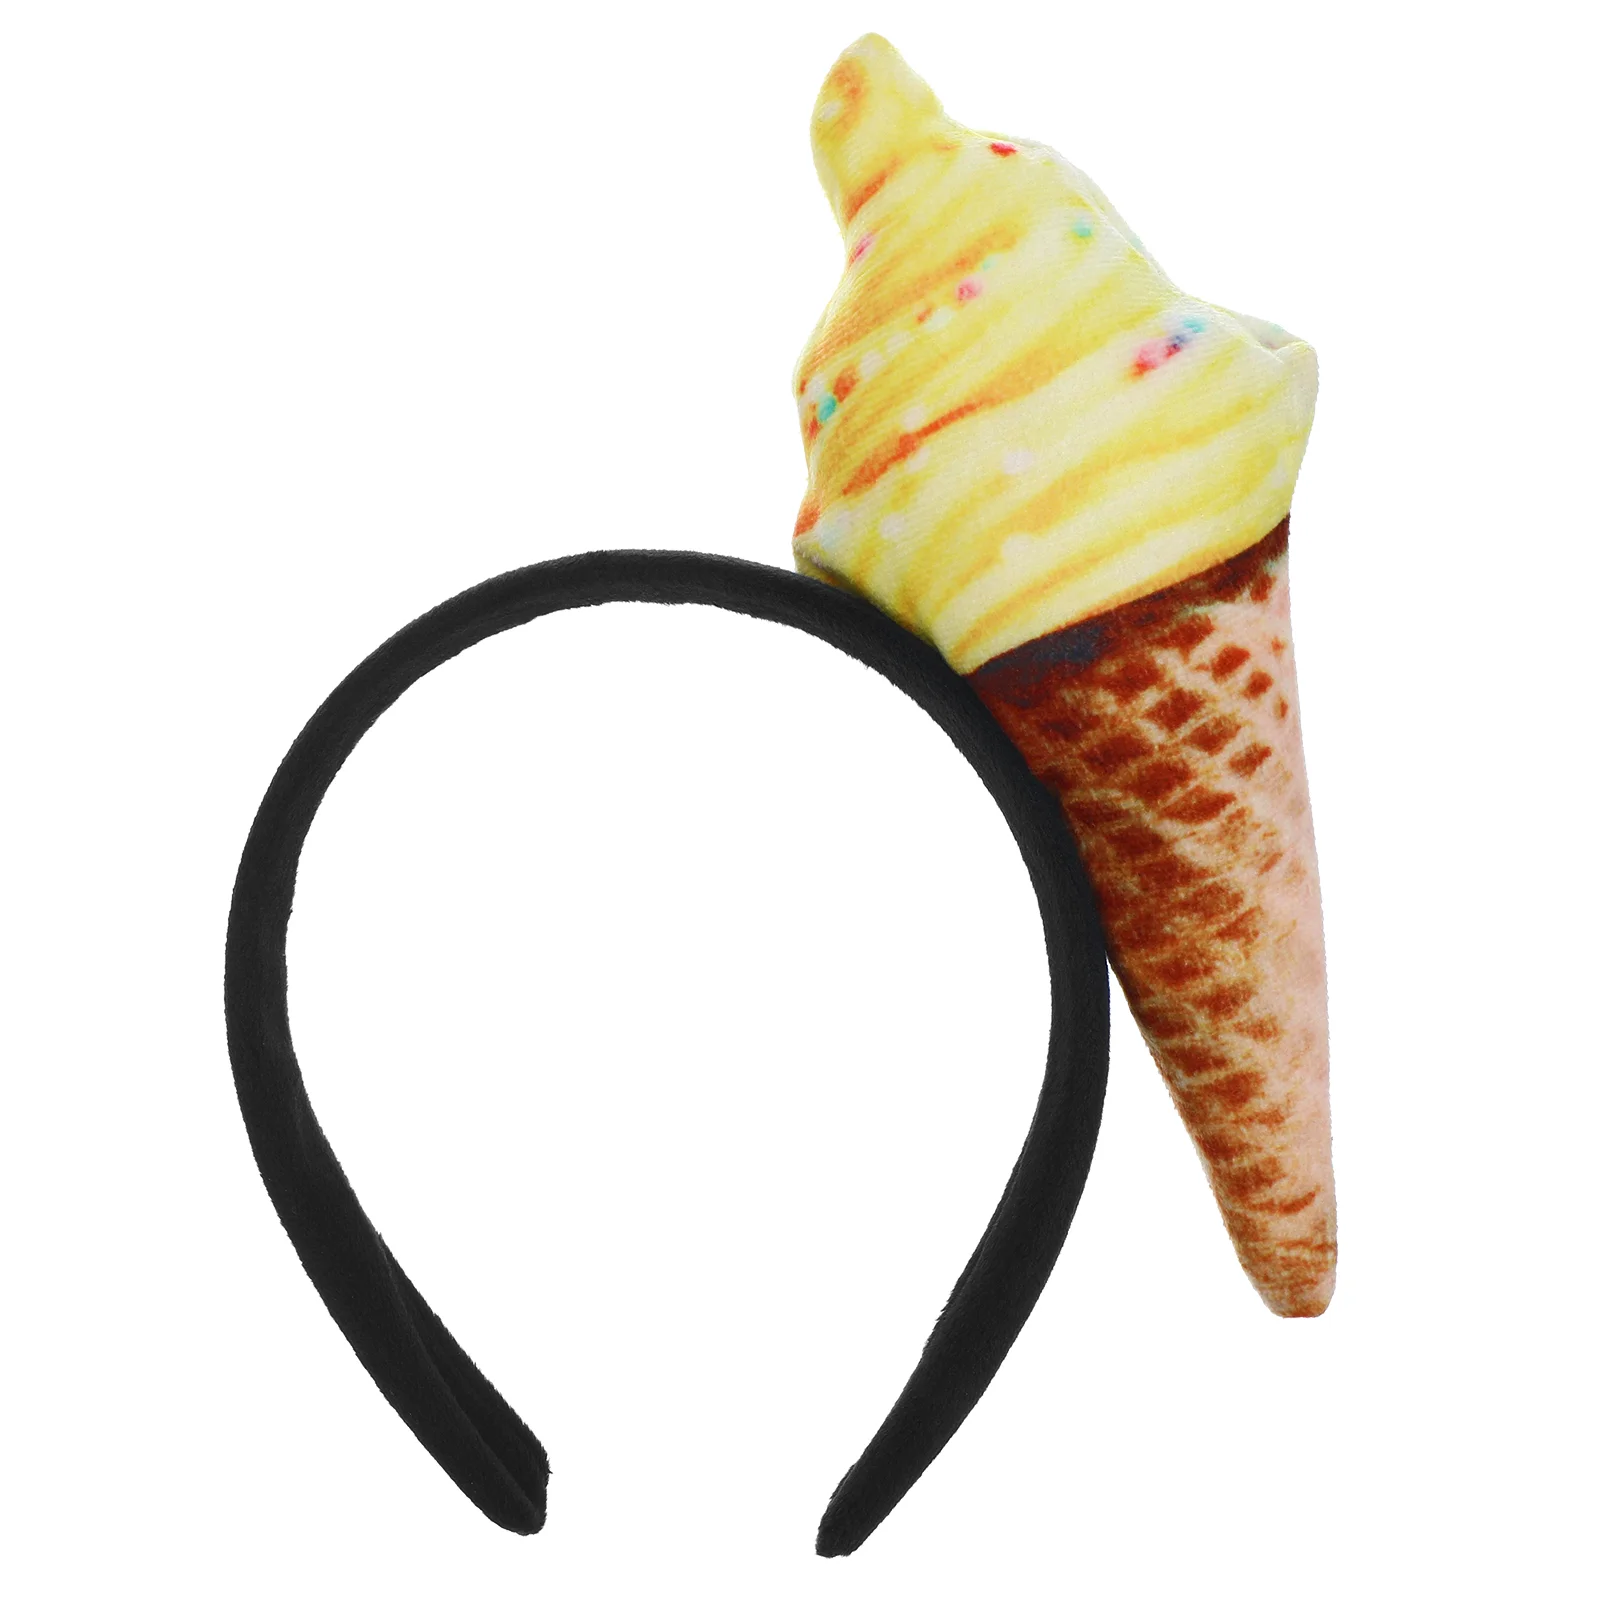 

Ice Cream Headband Cone Shape Headpiece Women Girls Funny Hair Hoop for Washing Face Party Costume Dresssing Up Cosplay Decor